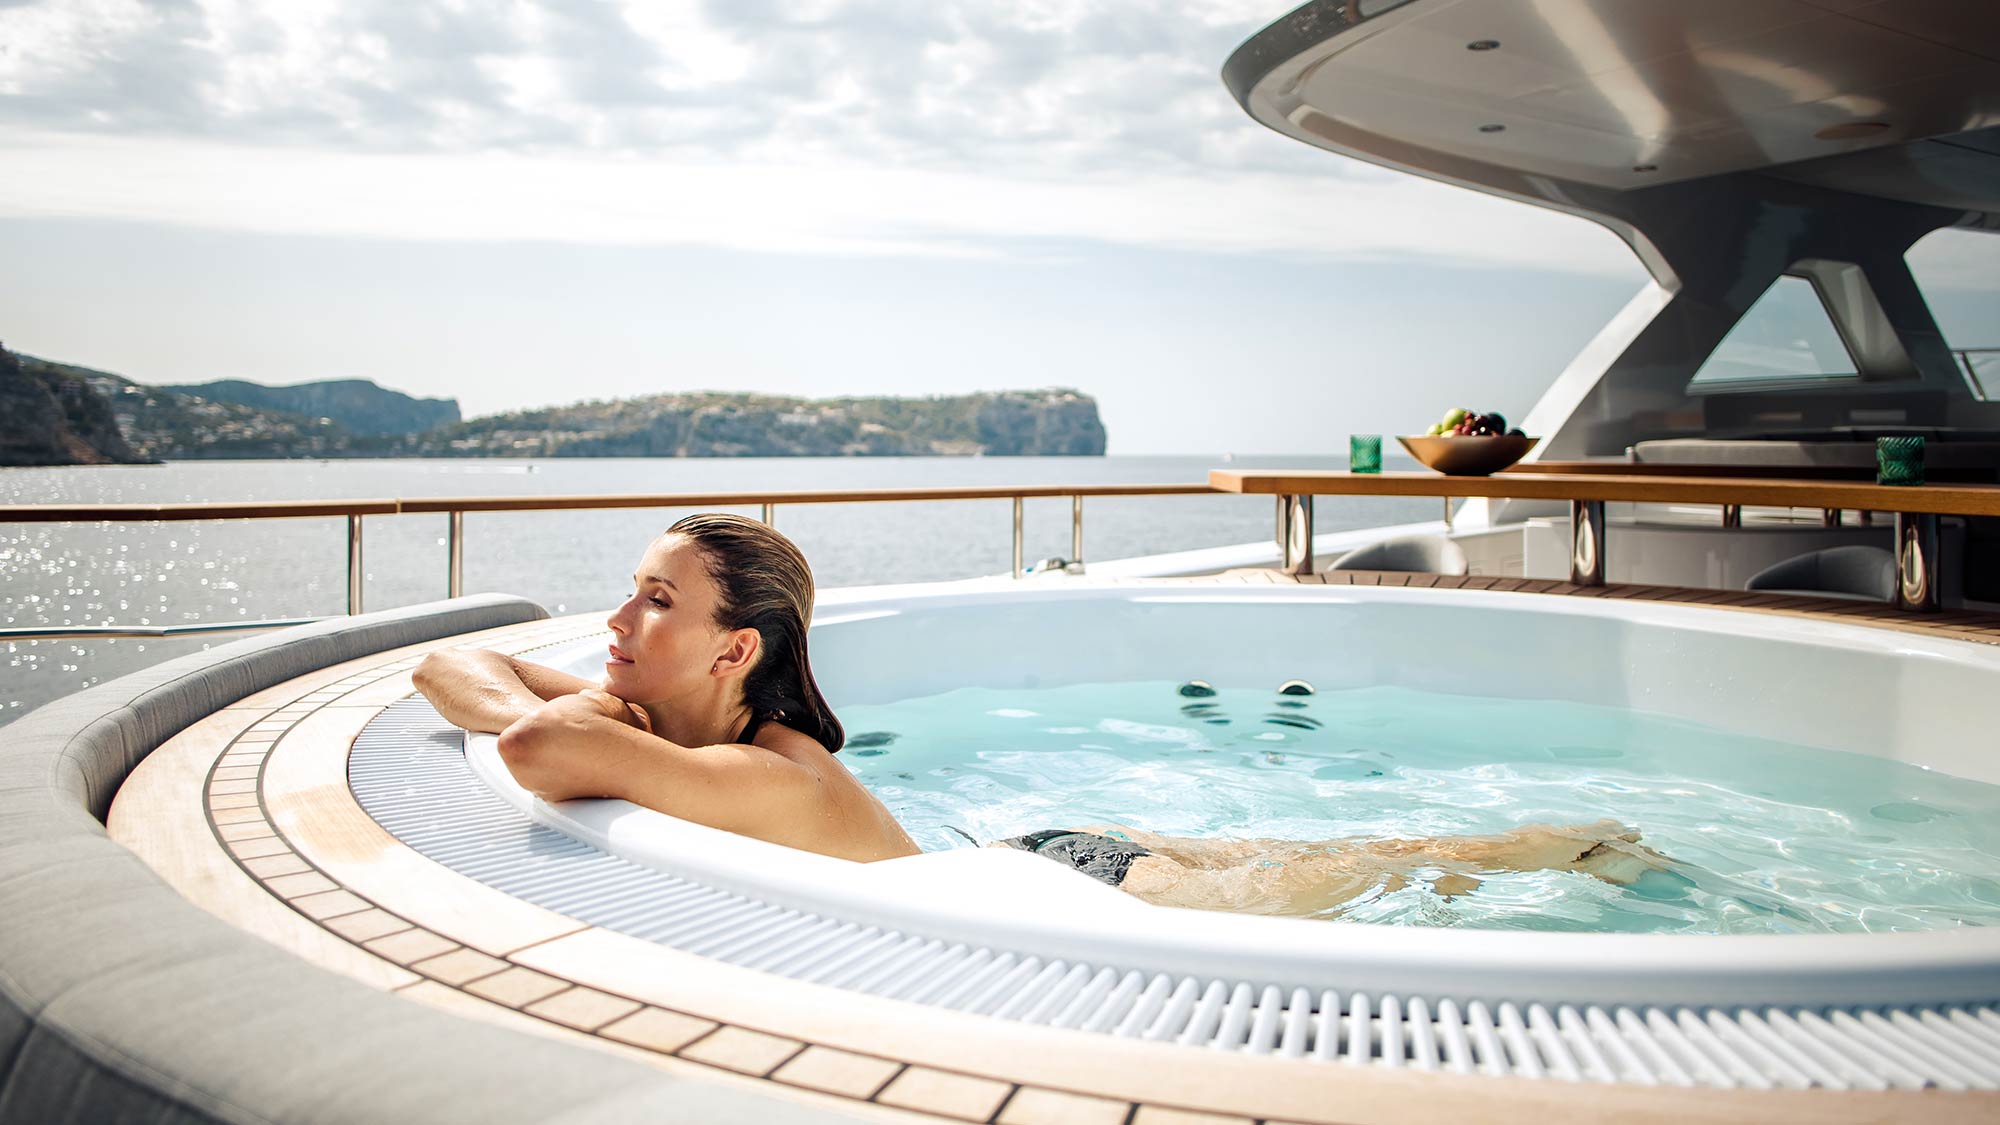 Woman In Superyacht Jacuzzi